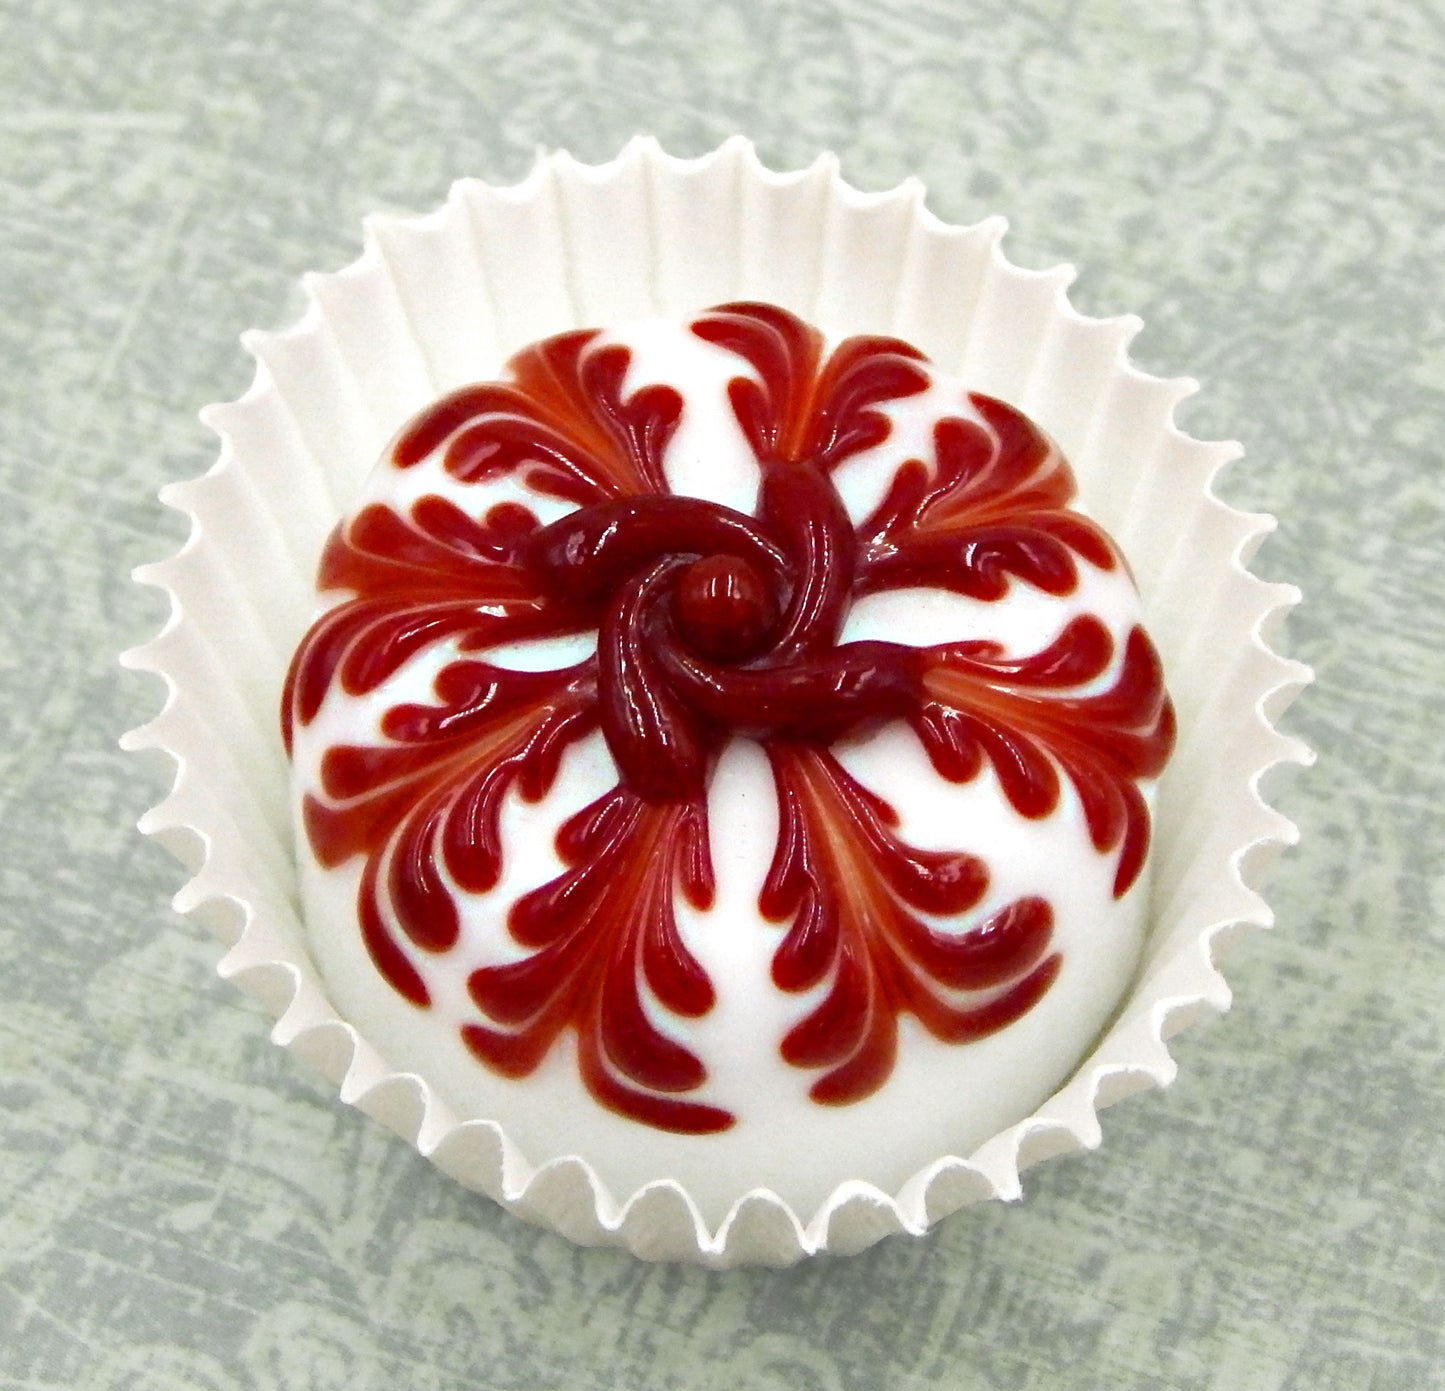 Art Glass Treats with Embellished Design #3 (18-133+)